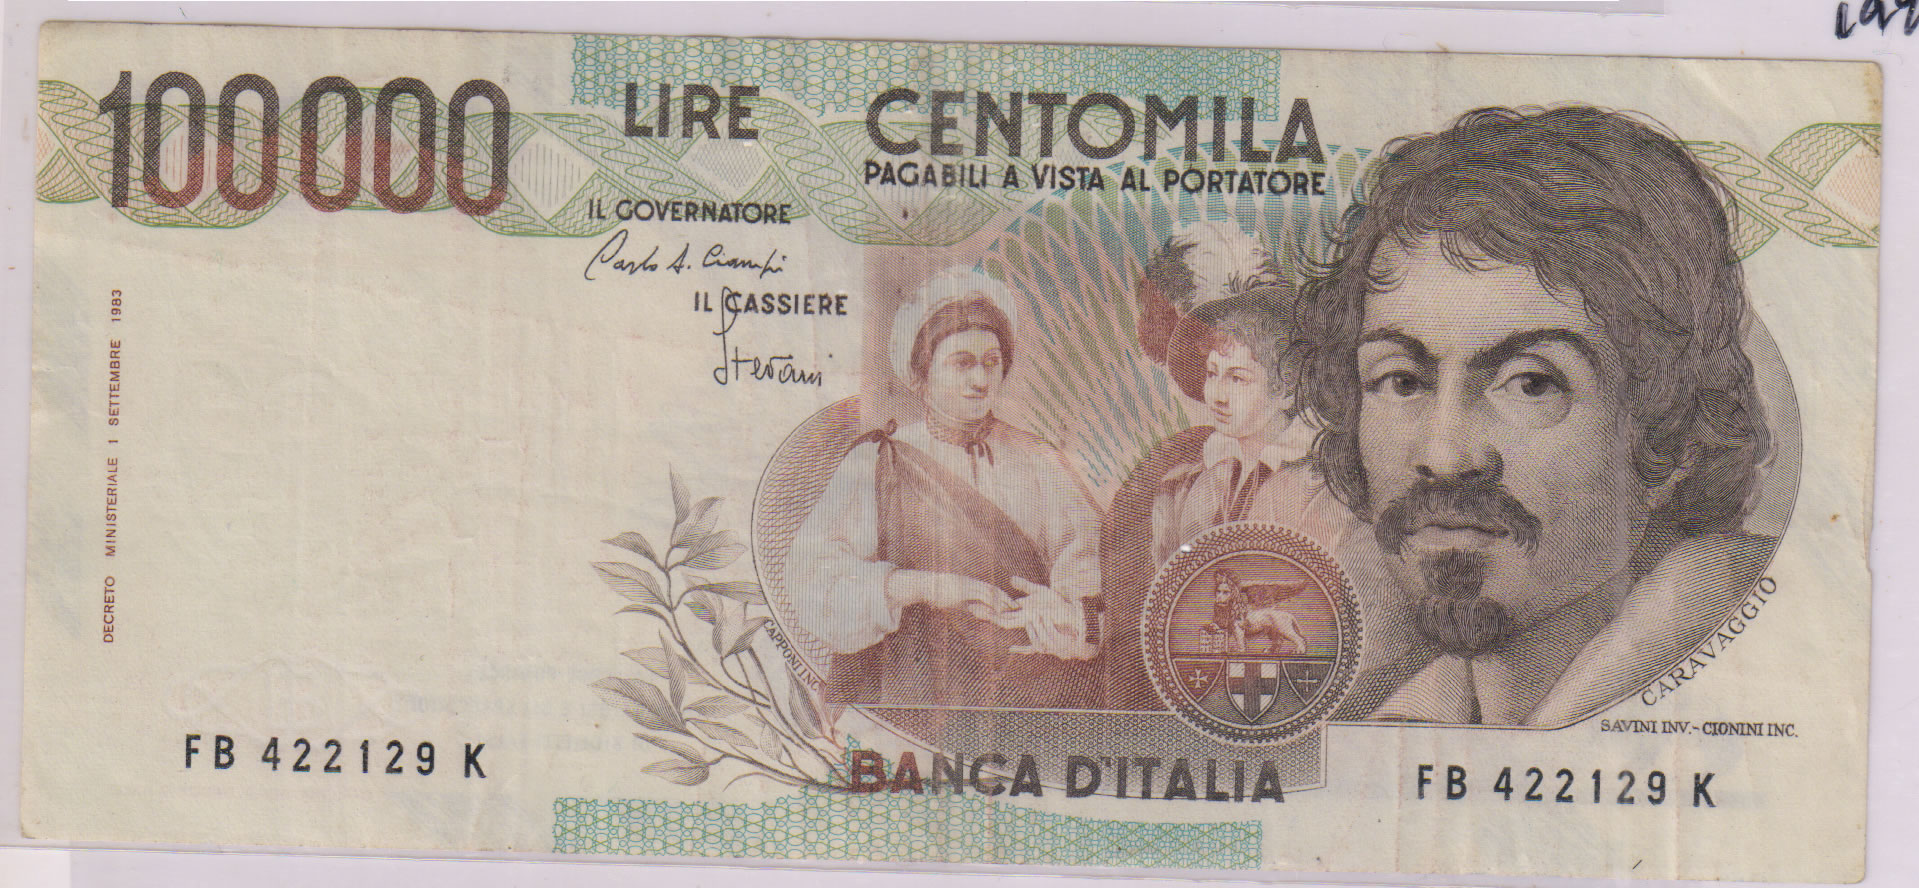 italy-100-000-lire-1983-vf-currency-note-kb-coins-currencies